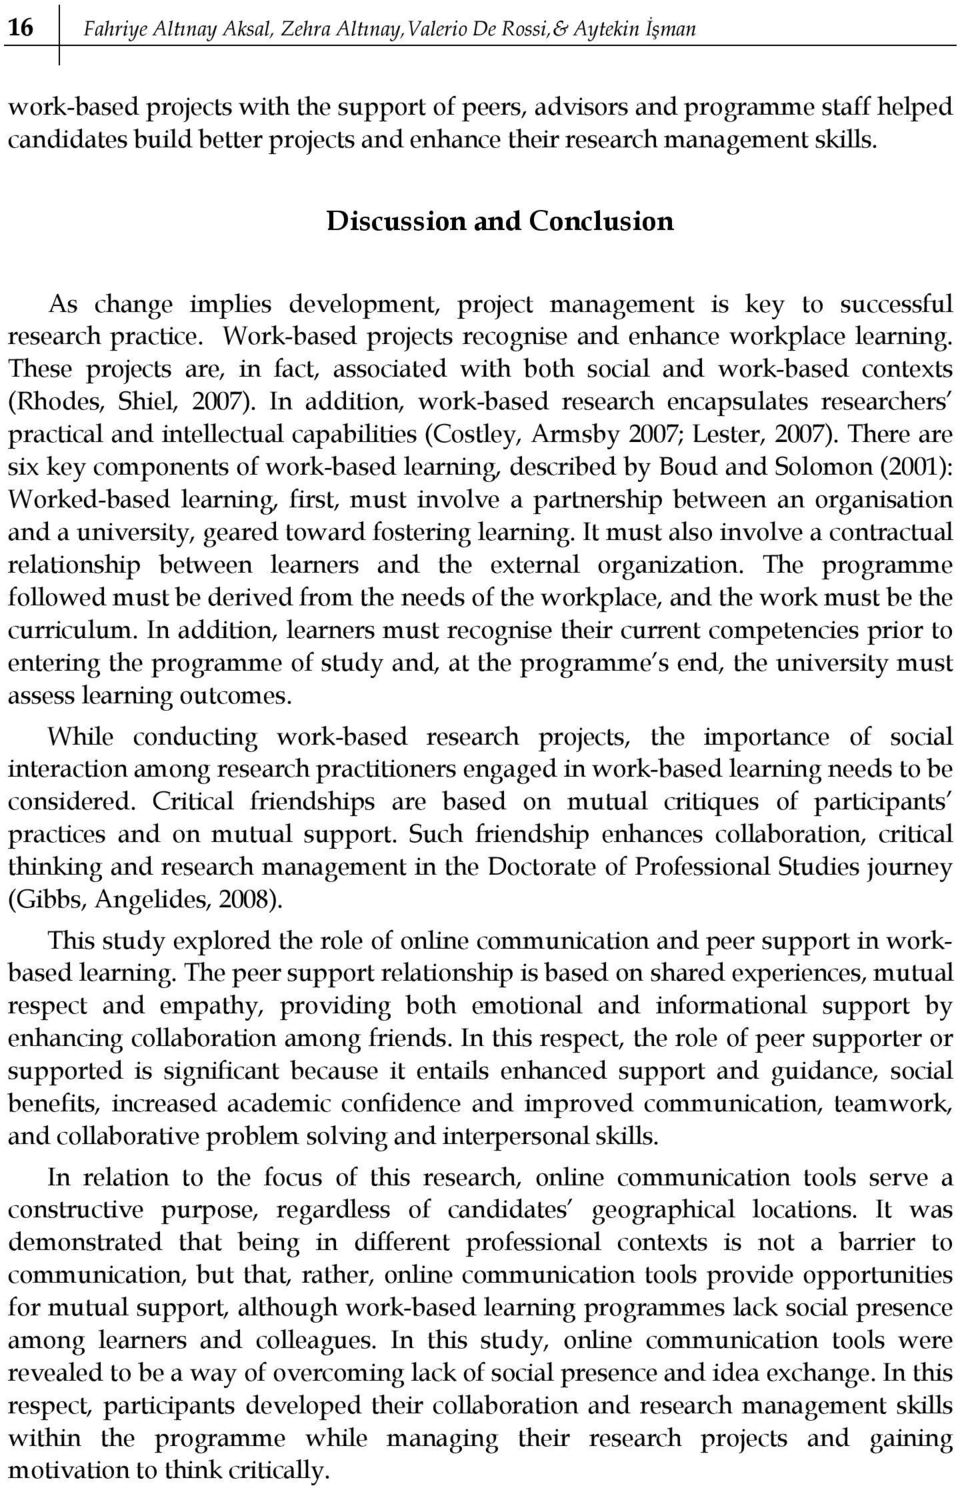 Work-based projects recognise and enhance workplace learning. These projects are, in fact, associated with both social and work-based contexts (Rhodes, Shiel, 2007).